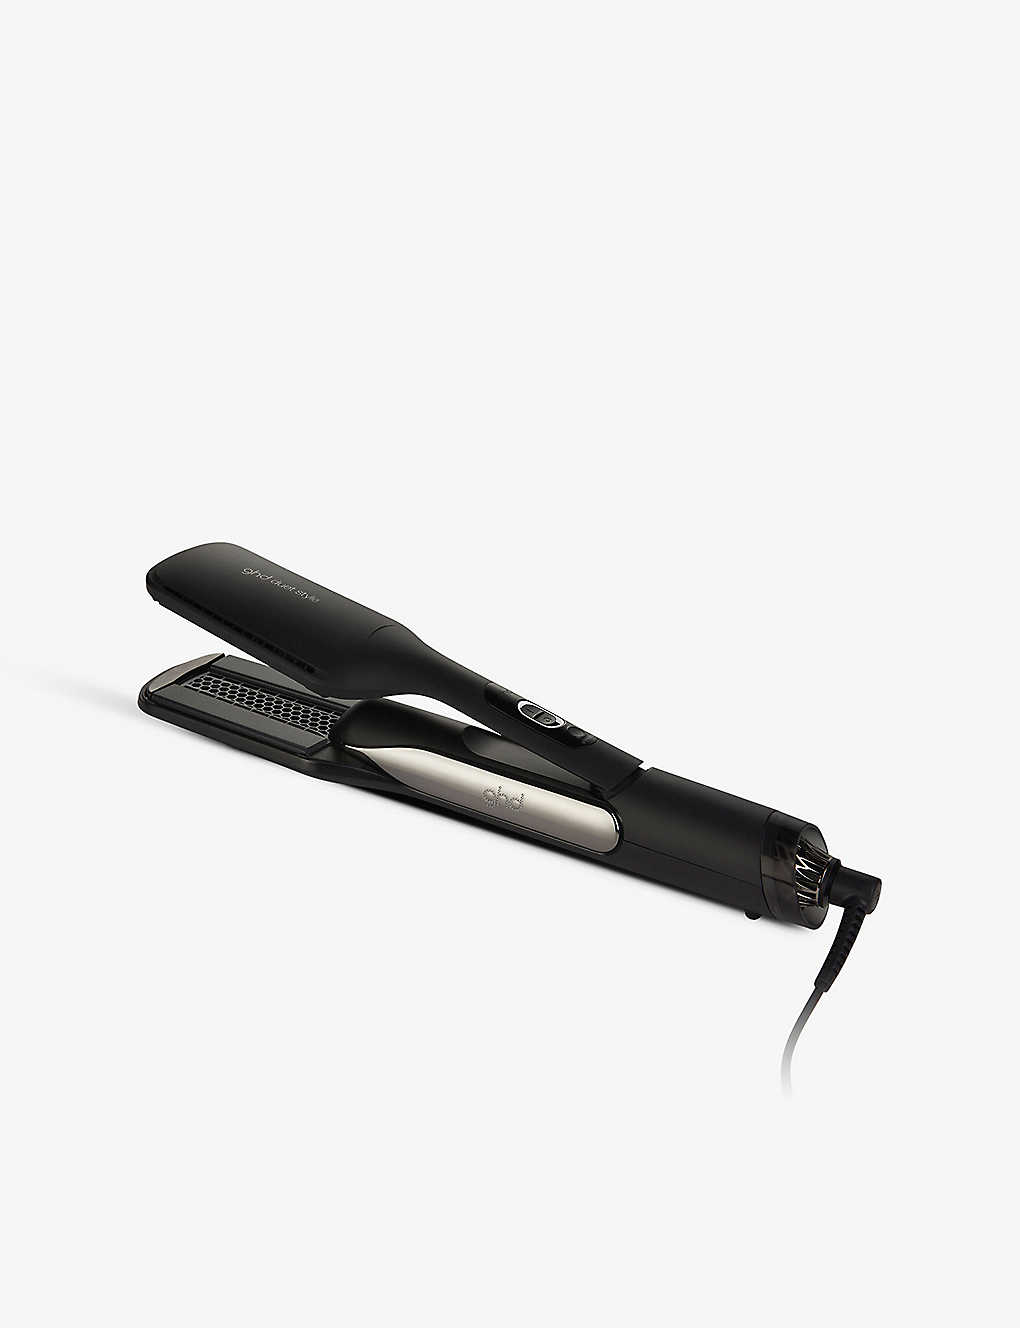 Ghd Black Duet Style Two-in-one Hot Air Styler